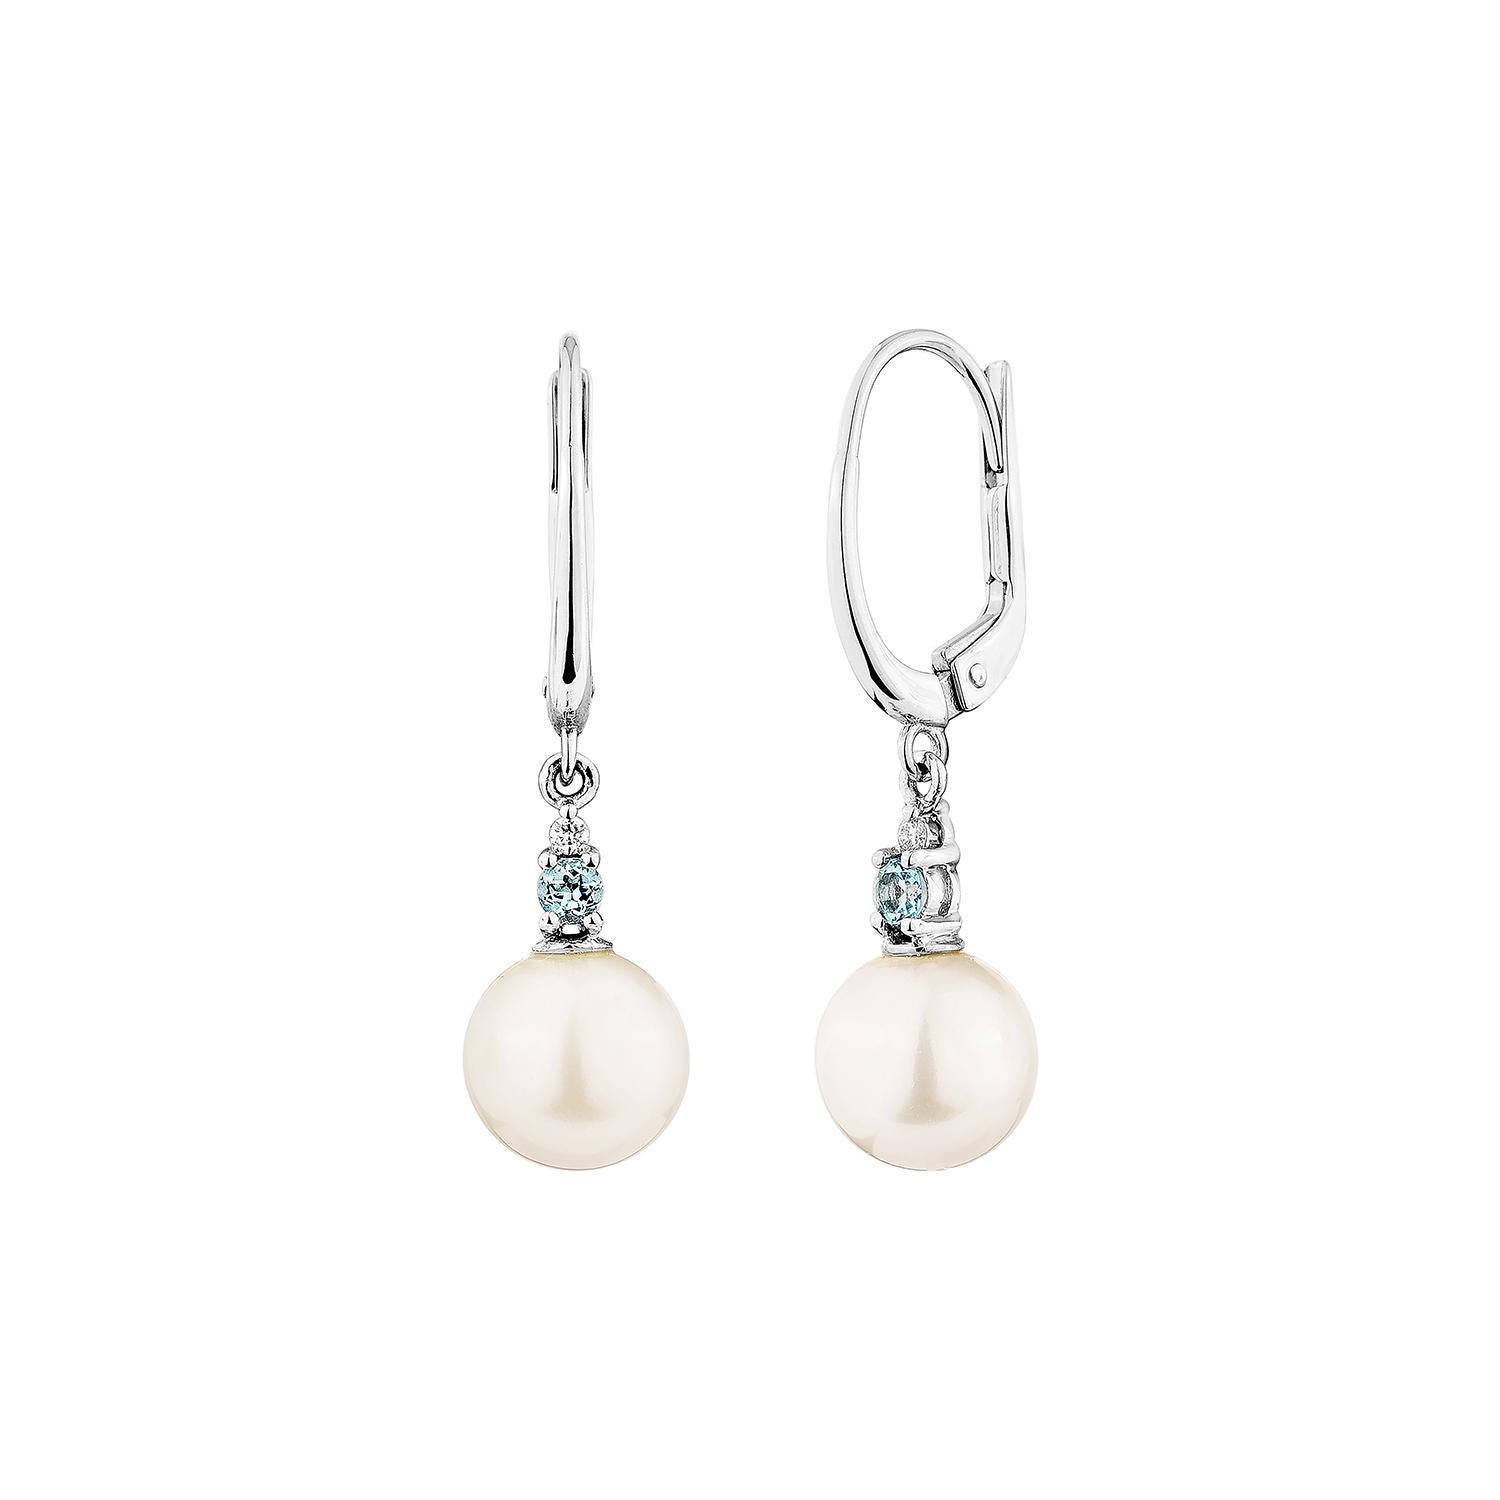 Round Cut  8.44 Carat White Pearl Drop Earring in 14KWG with Swiss Blue Topaz & Diamond. For Sale